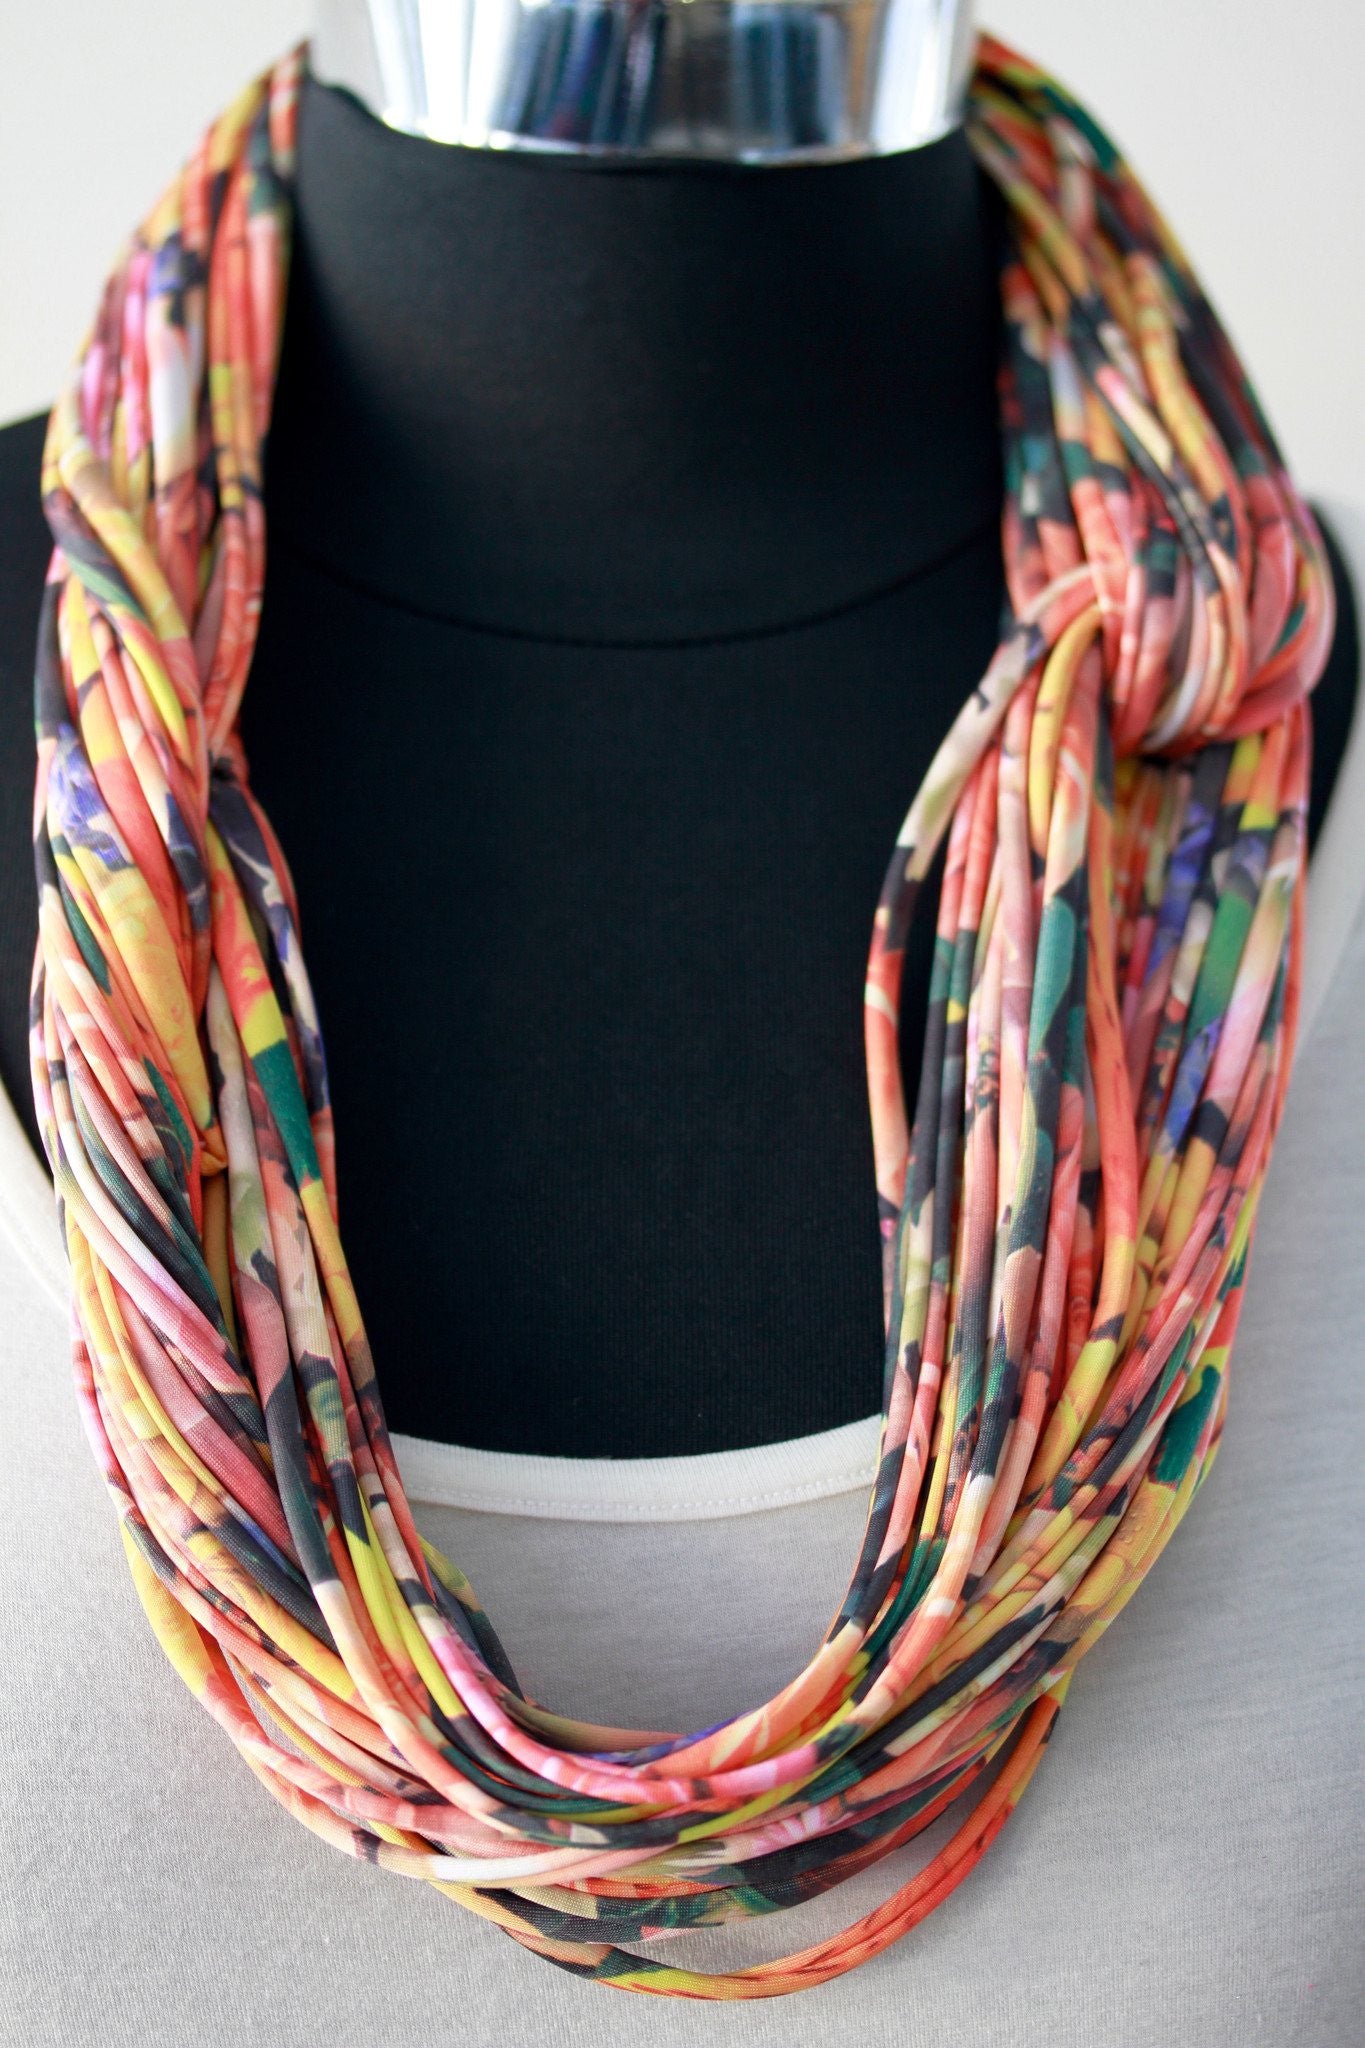 Handmade Floral Peach Infinity Scarf Necklace for Women